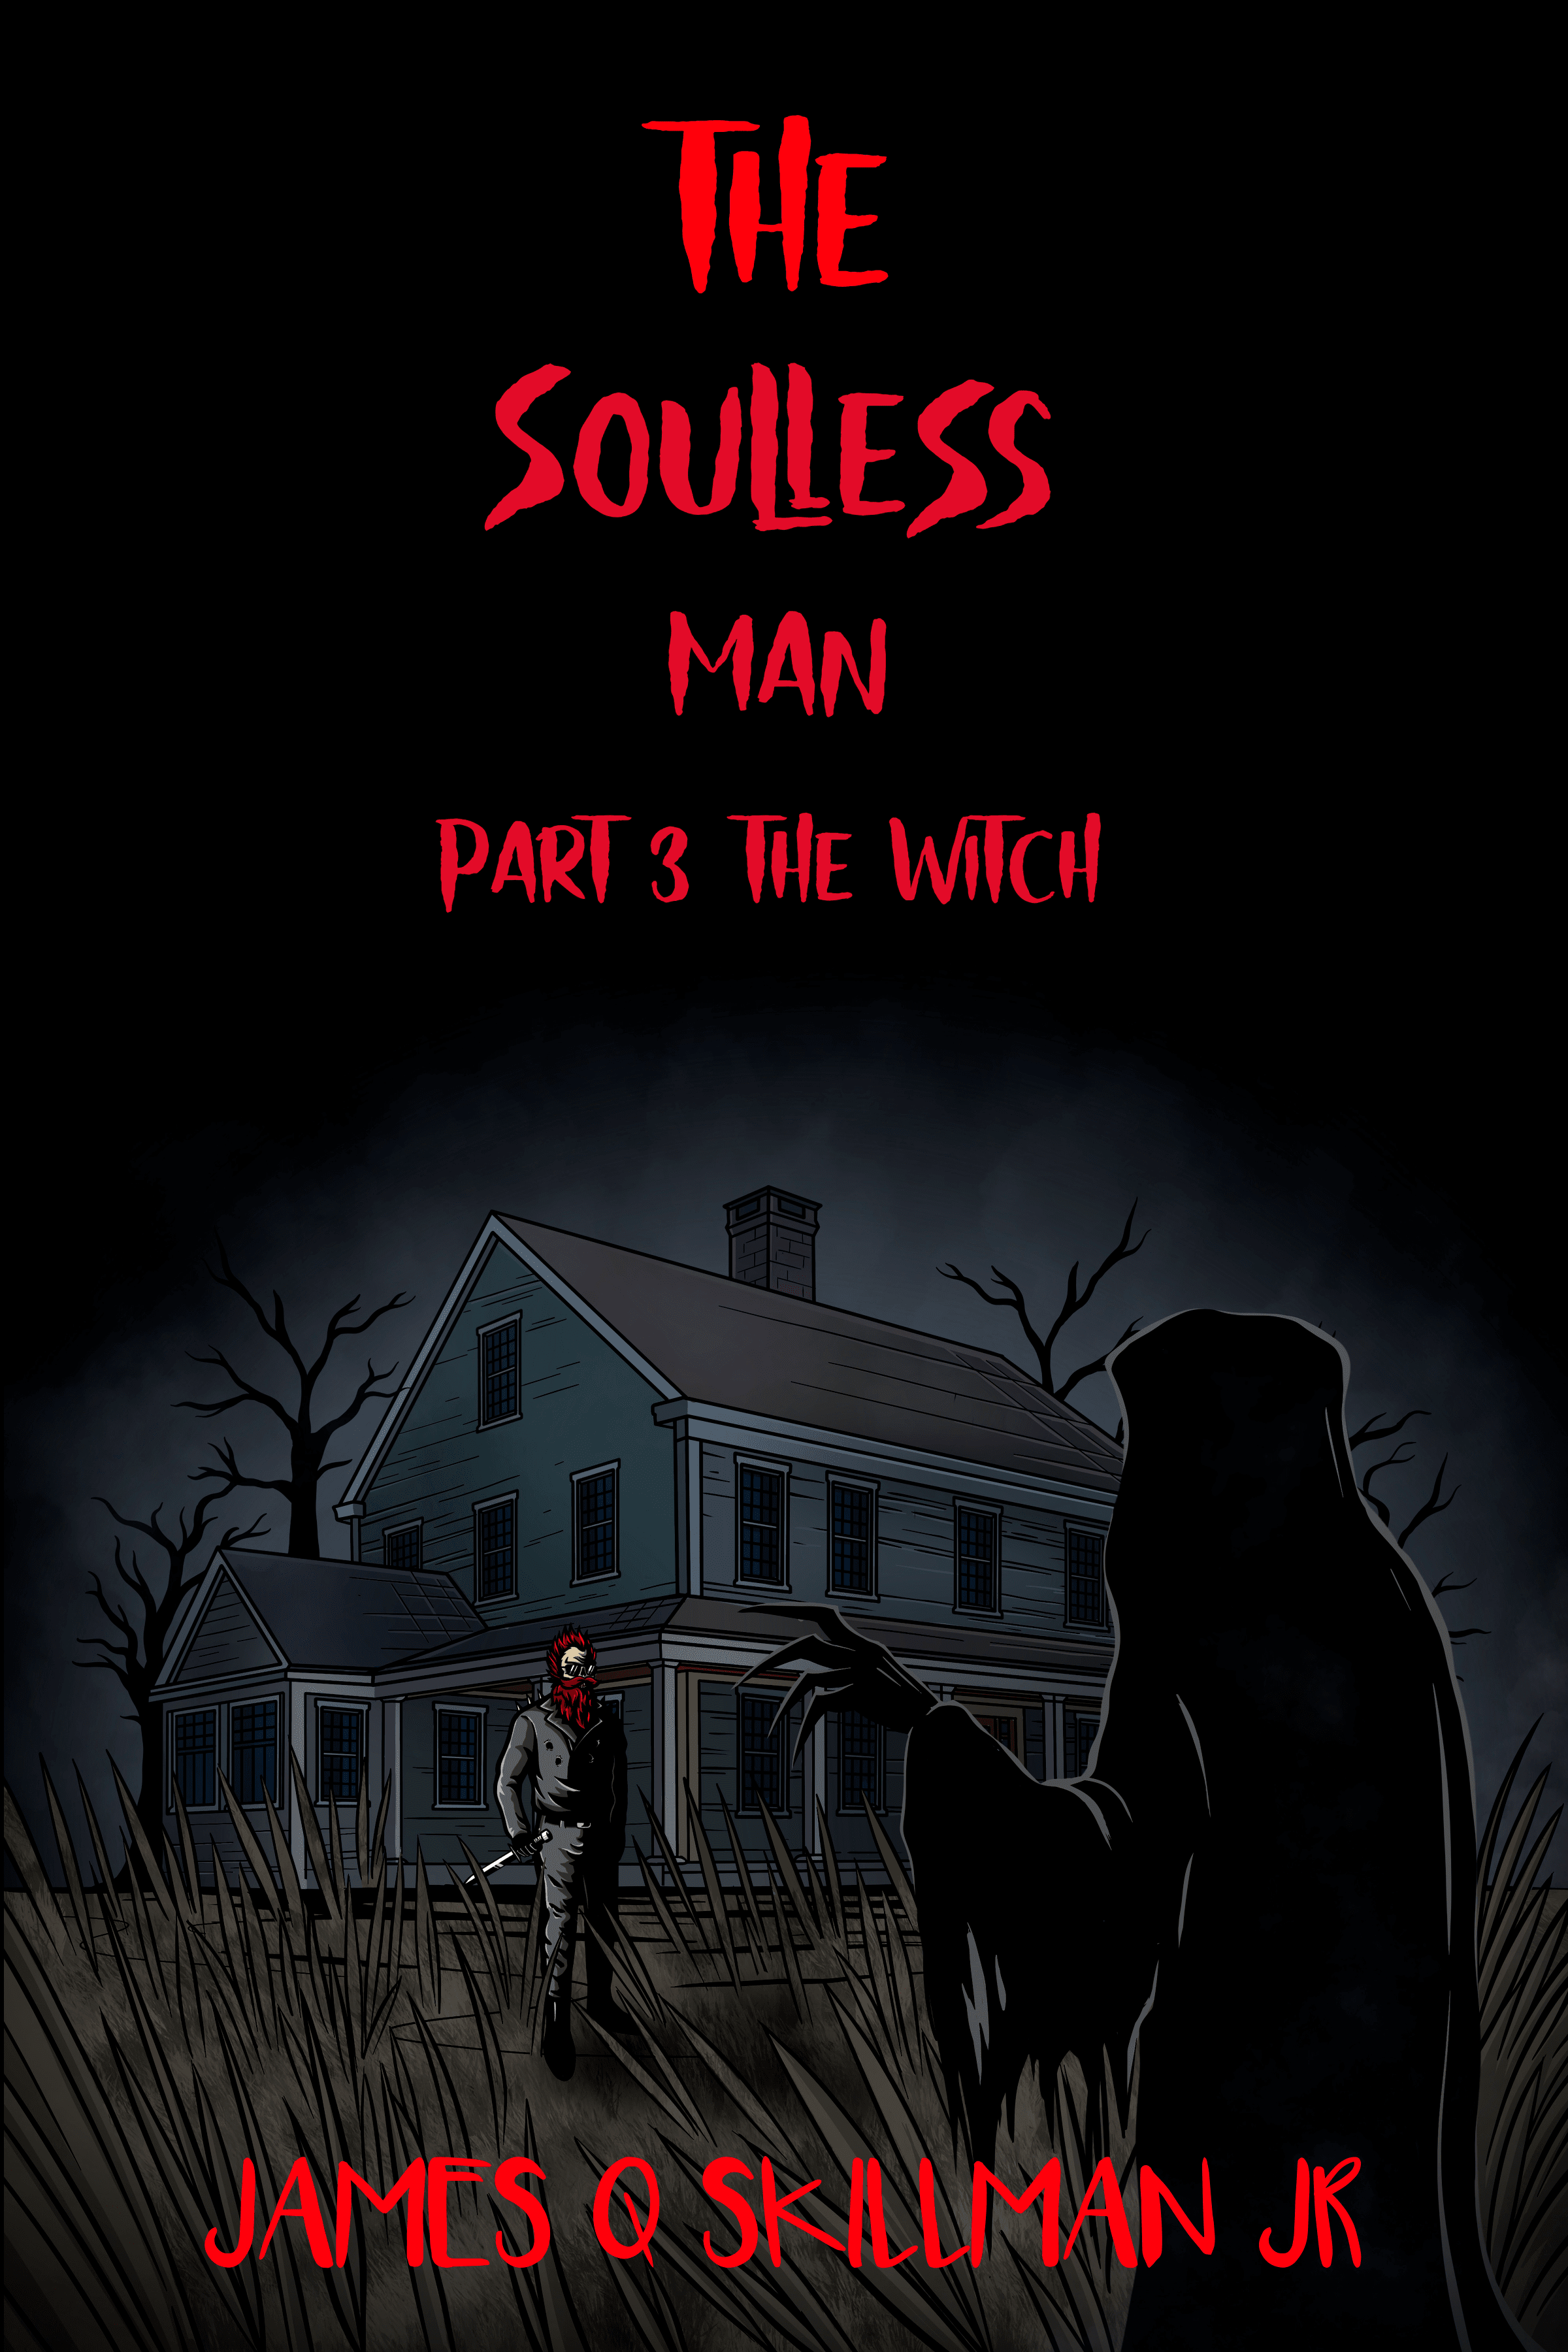 The Soulless man Part 3 The Witch's Book Image